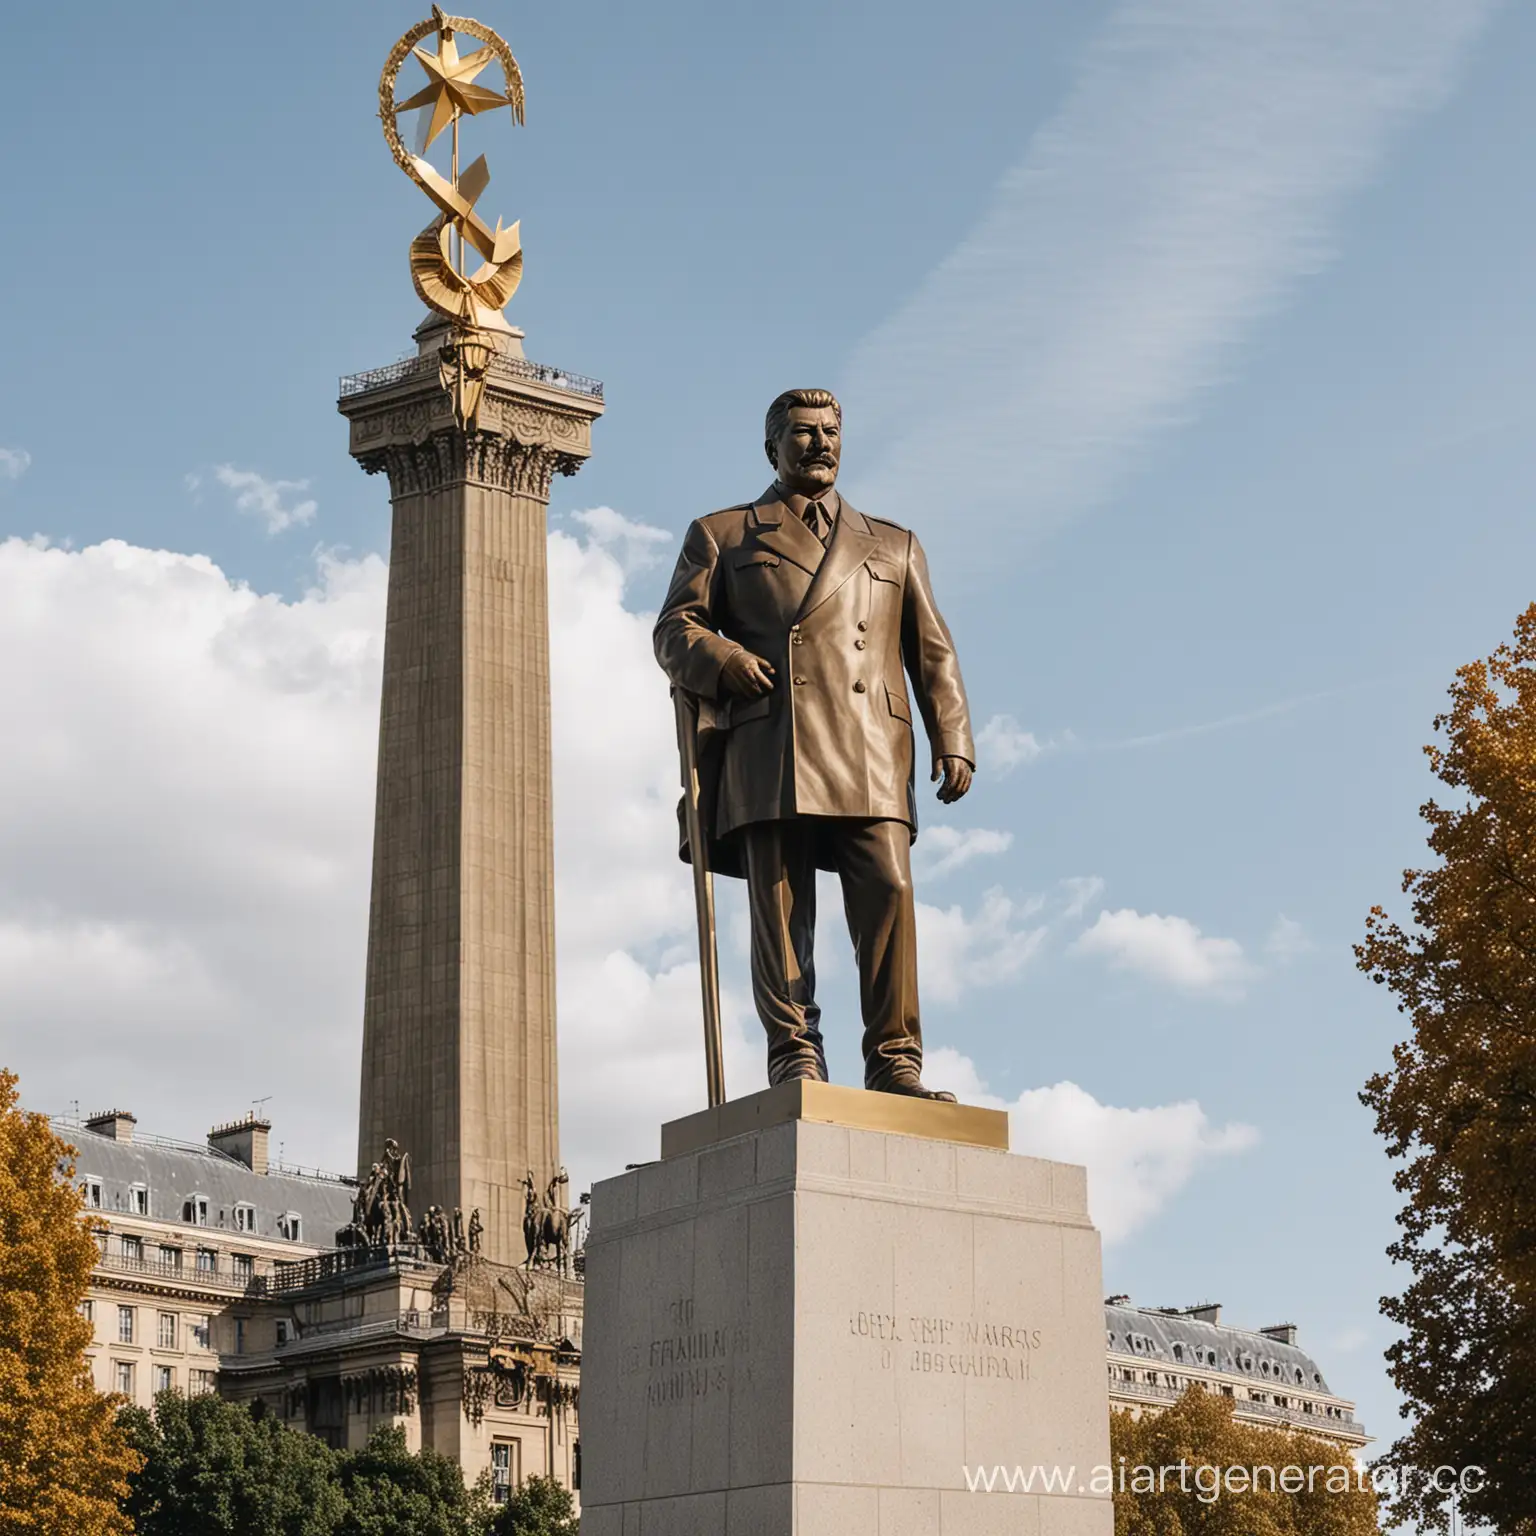 Giant-Stalin-Statue-with-Golden-Sickle-on-Parisian-Cubic-Pedestal